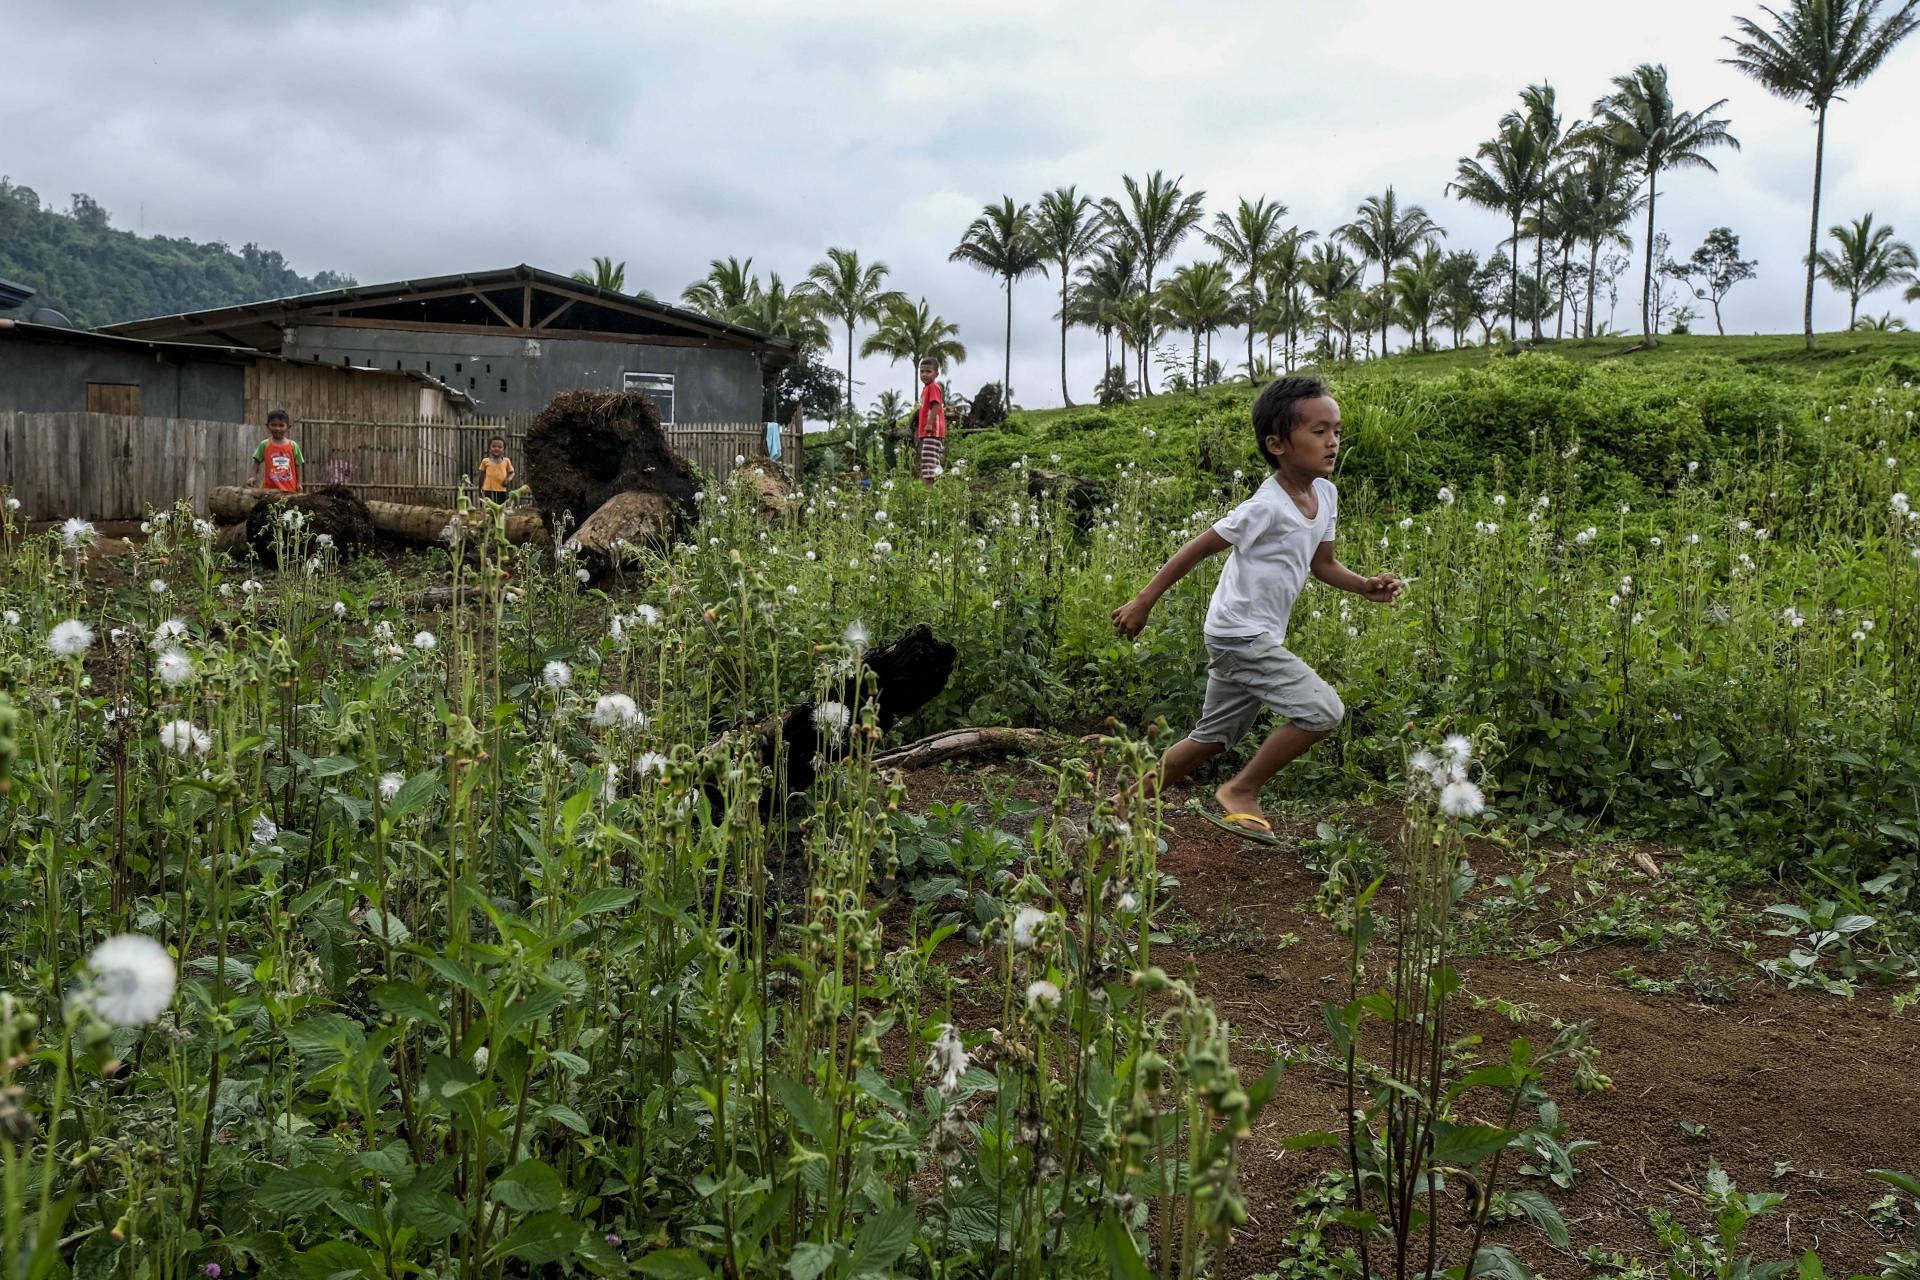  Displaced children playing in the open fields in Cambodia